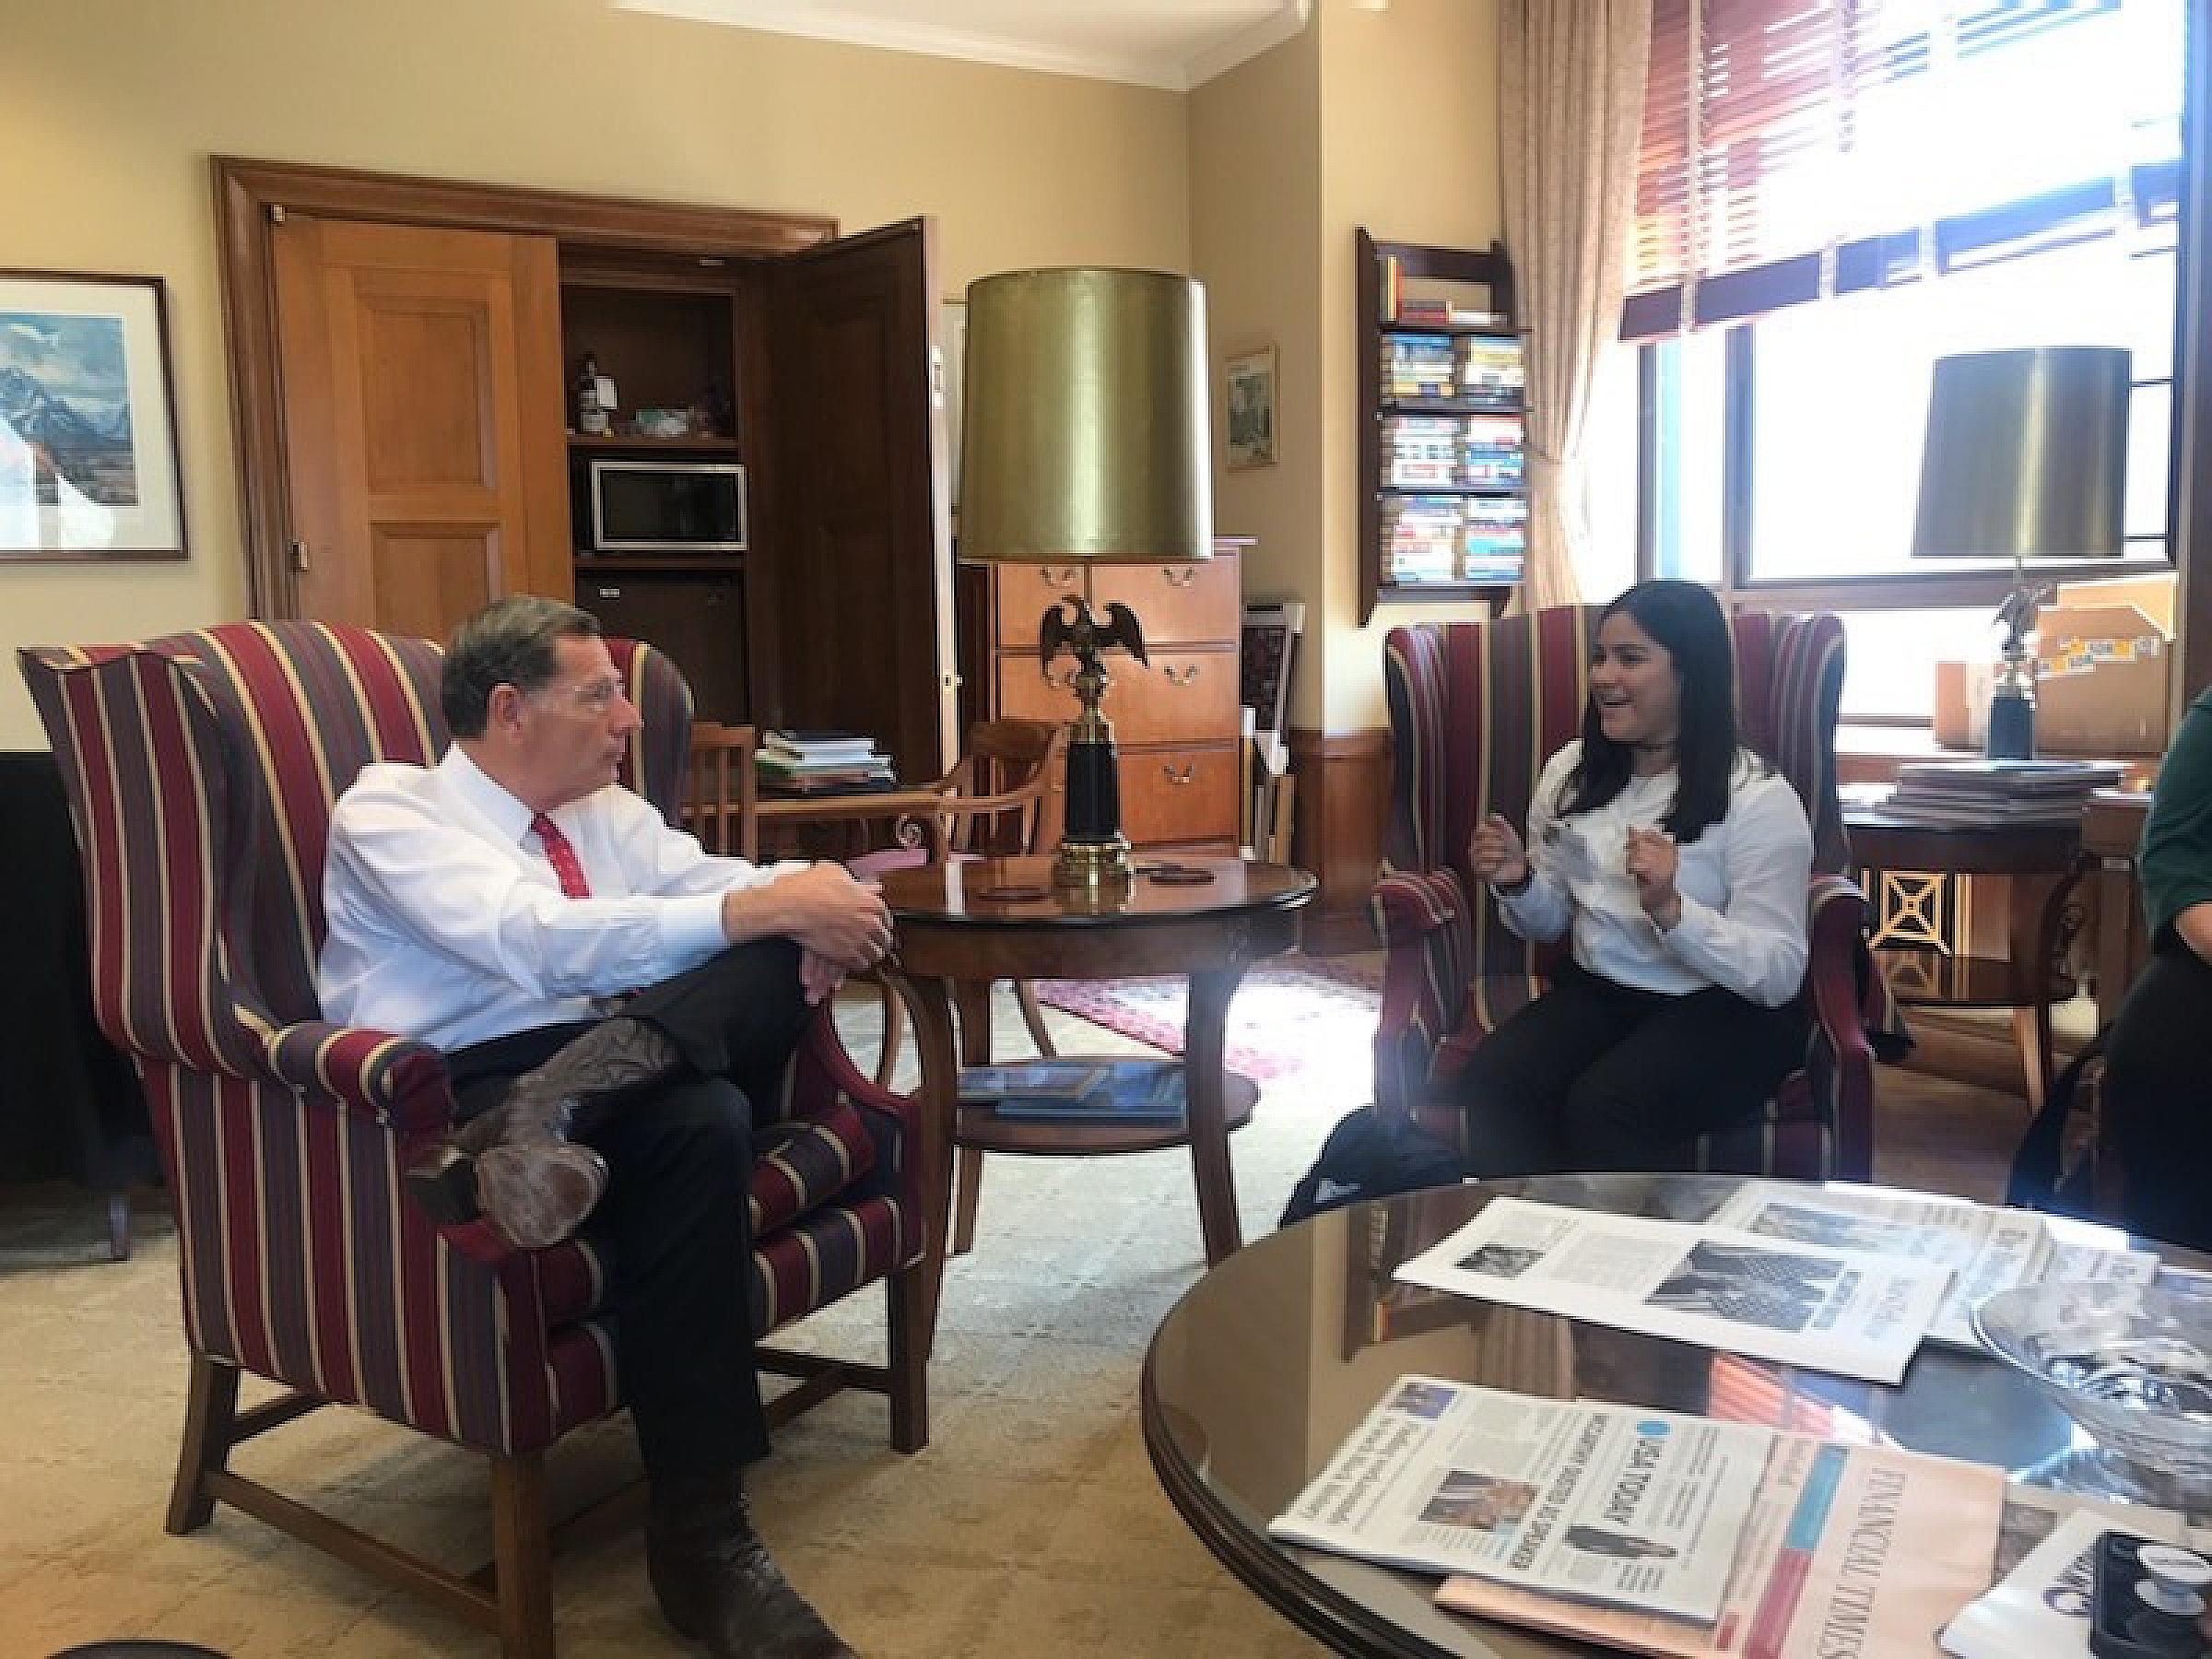 Fernanda Costilla, student researcher for Path Makers Scholars Program, discusses her training and research with Senator John Barrasso (WY).